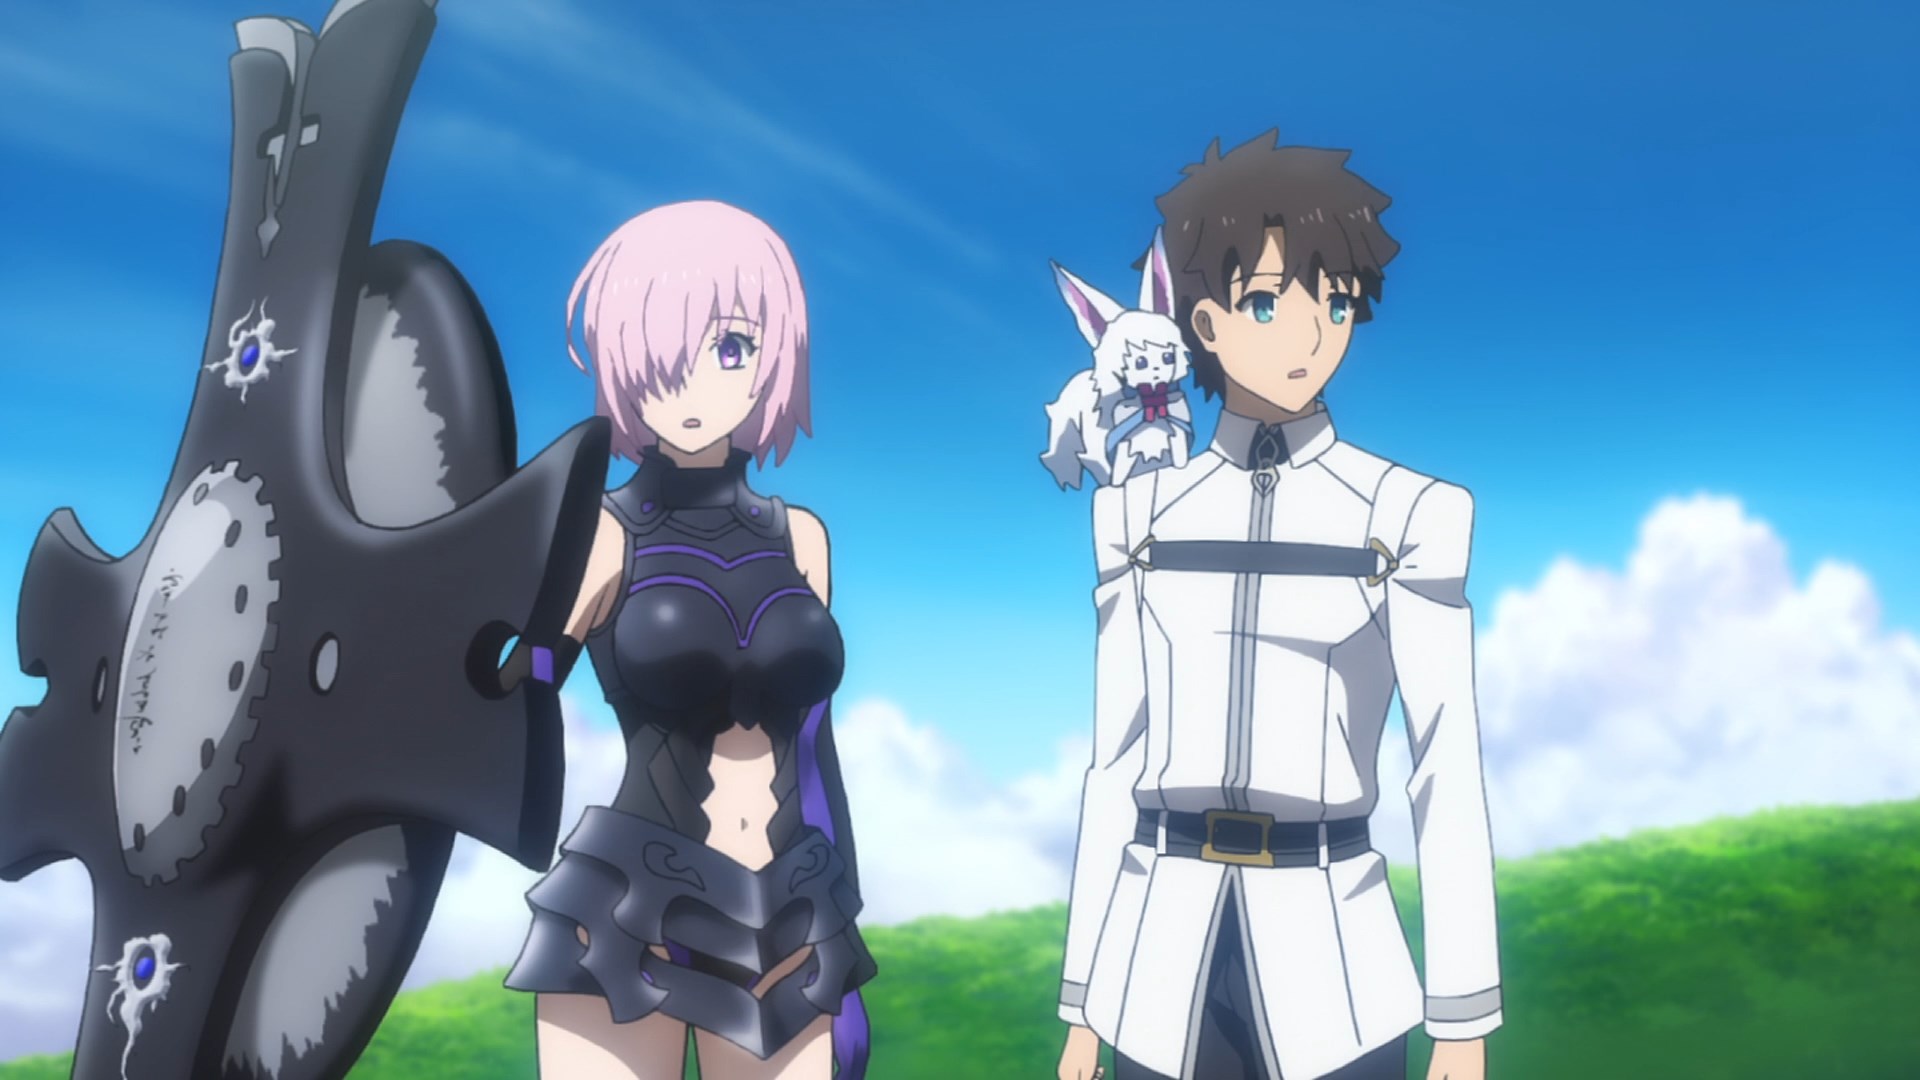 Fate/Grand Order: First Order (First Look) - AstroNerdBoy's Anime & Manga  Blog | AstroNerdBoy's Anime & Manga Blog